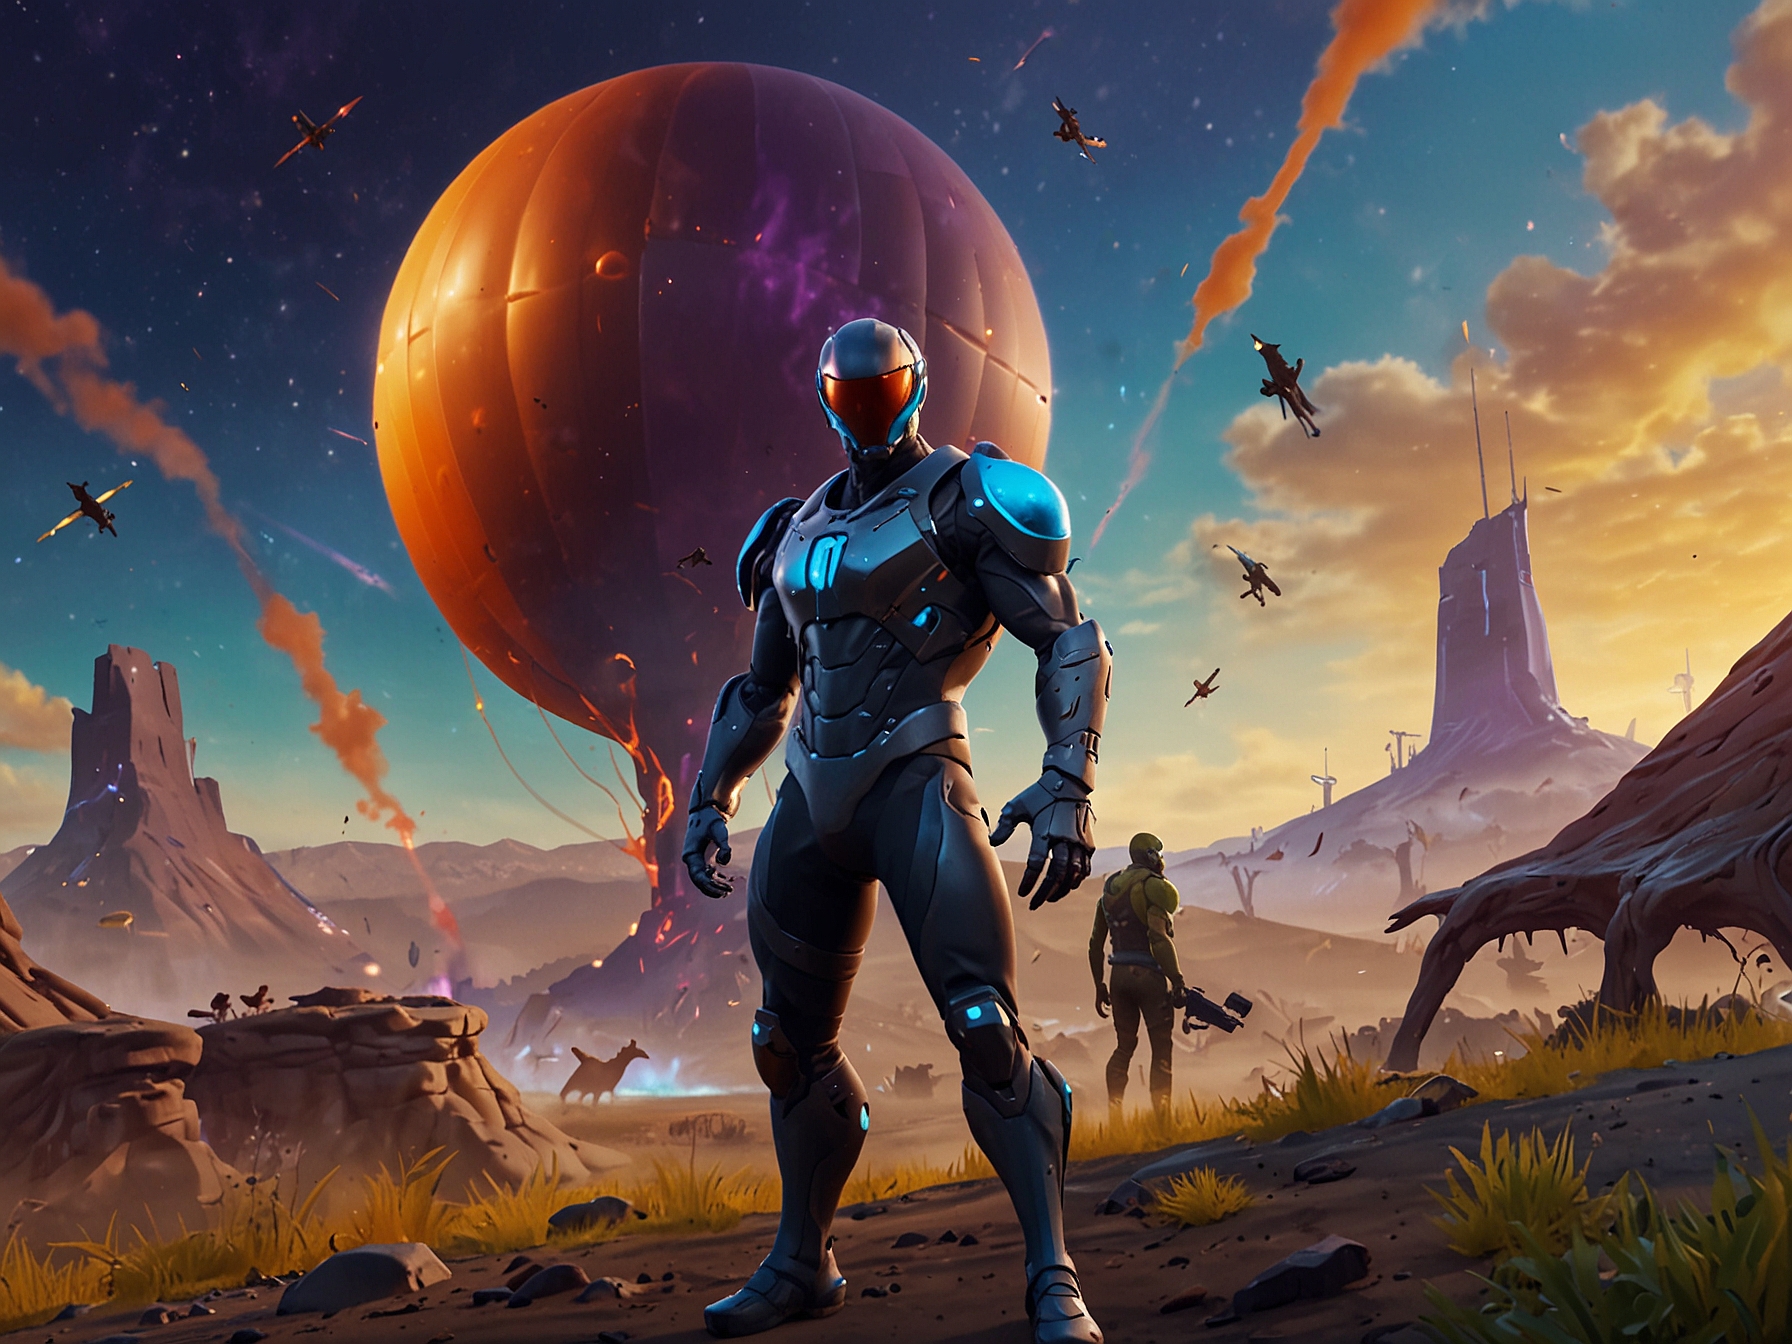 A dynamic illustration showing new futuristic skins and characters rumored for Fortnite Chapter 5 Season 4, set against a vibrant alien crash site backdrop with advanced tech labs.